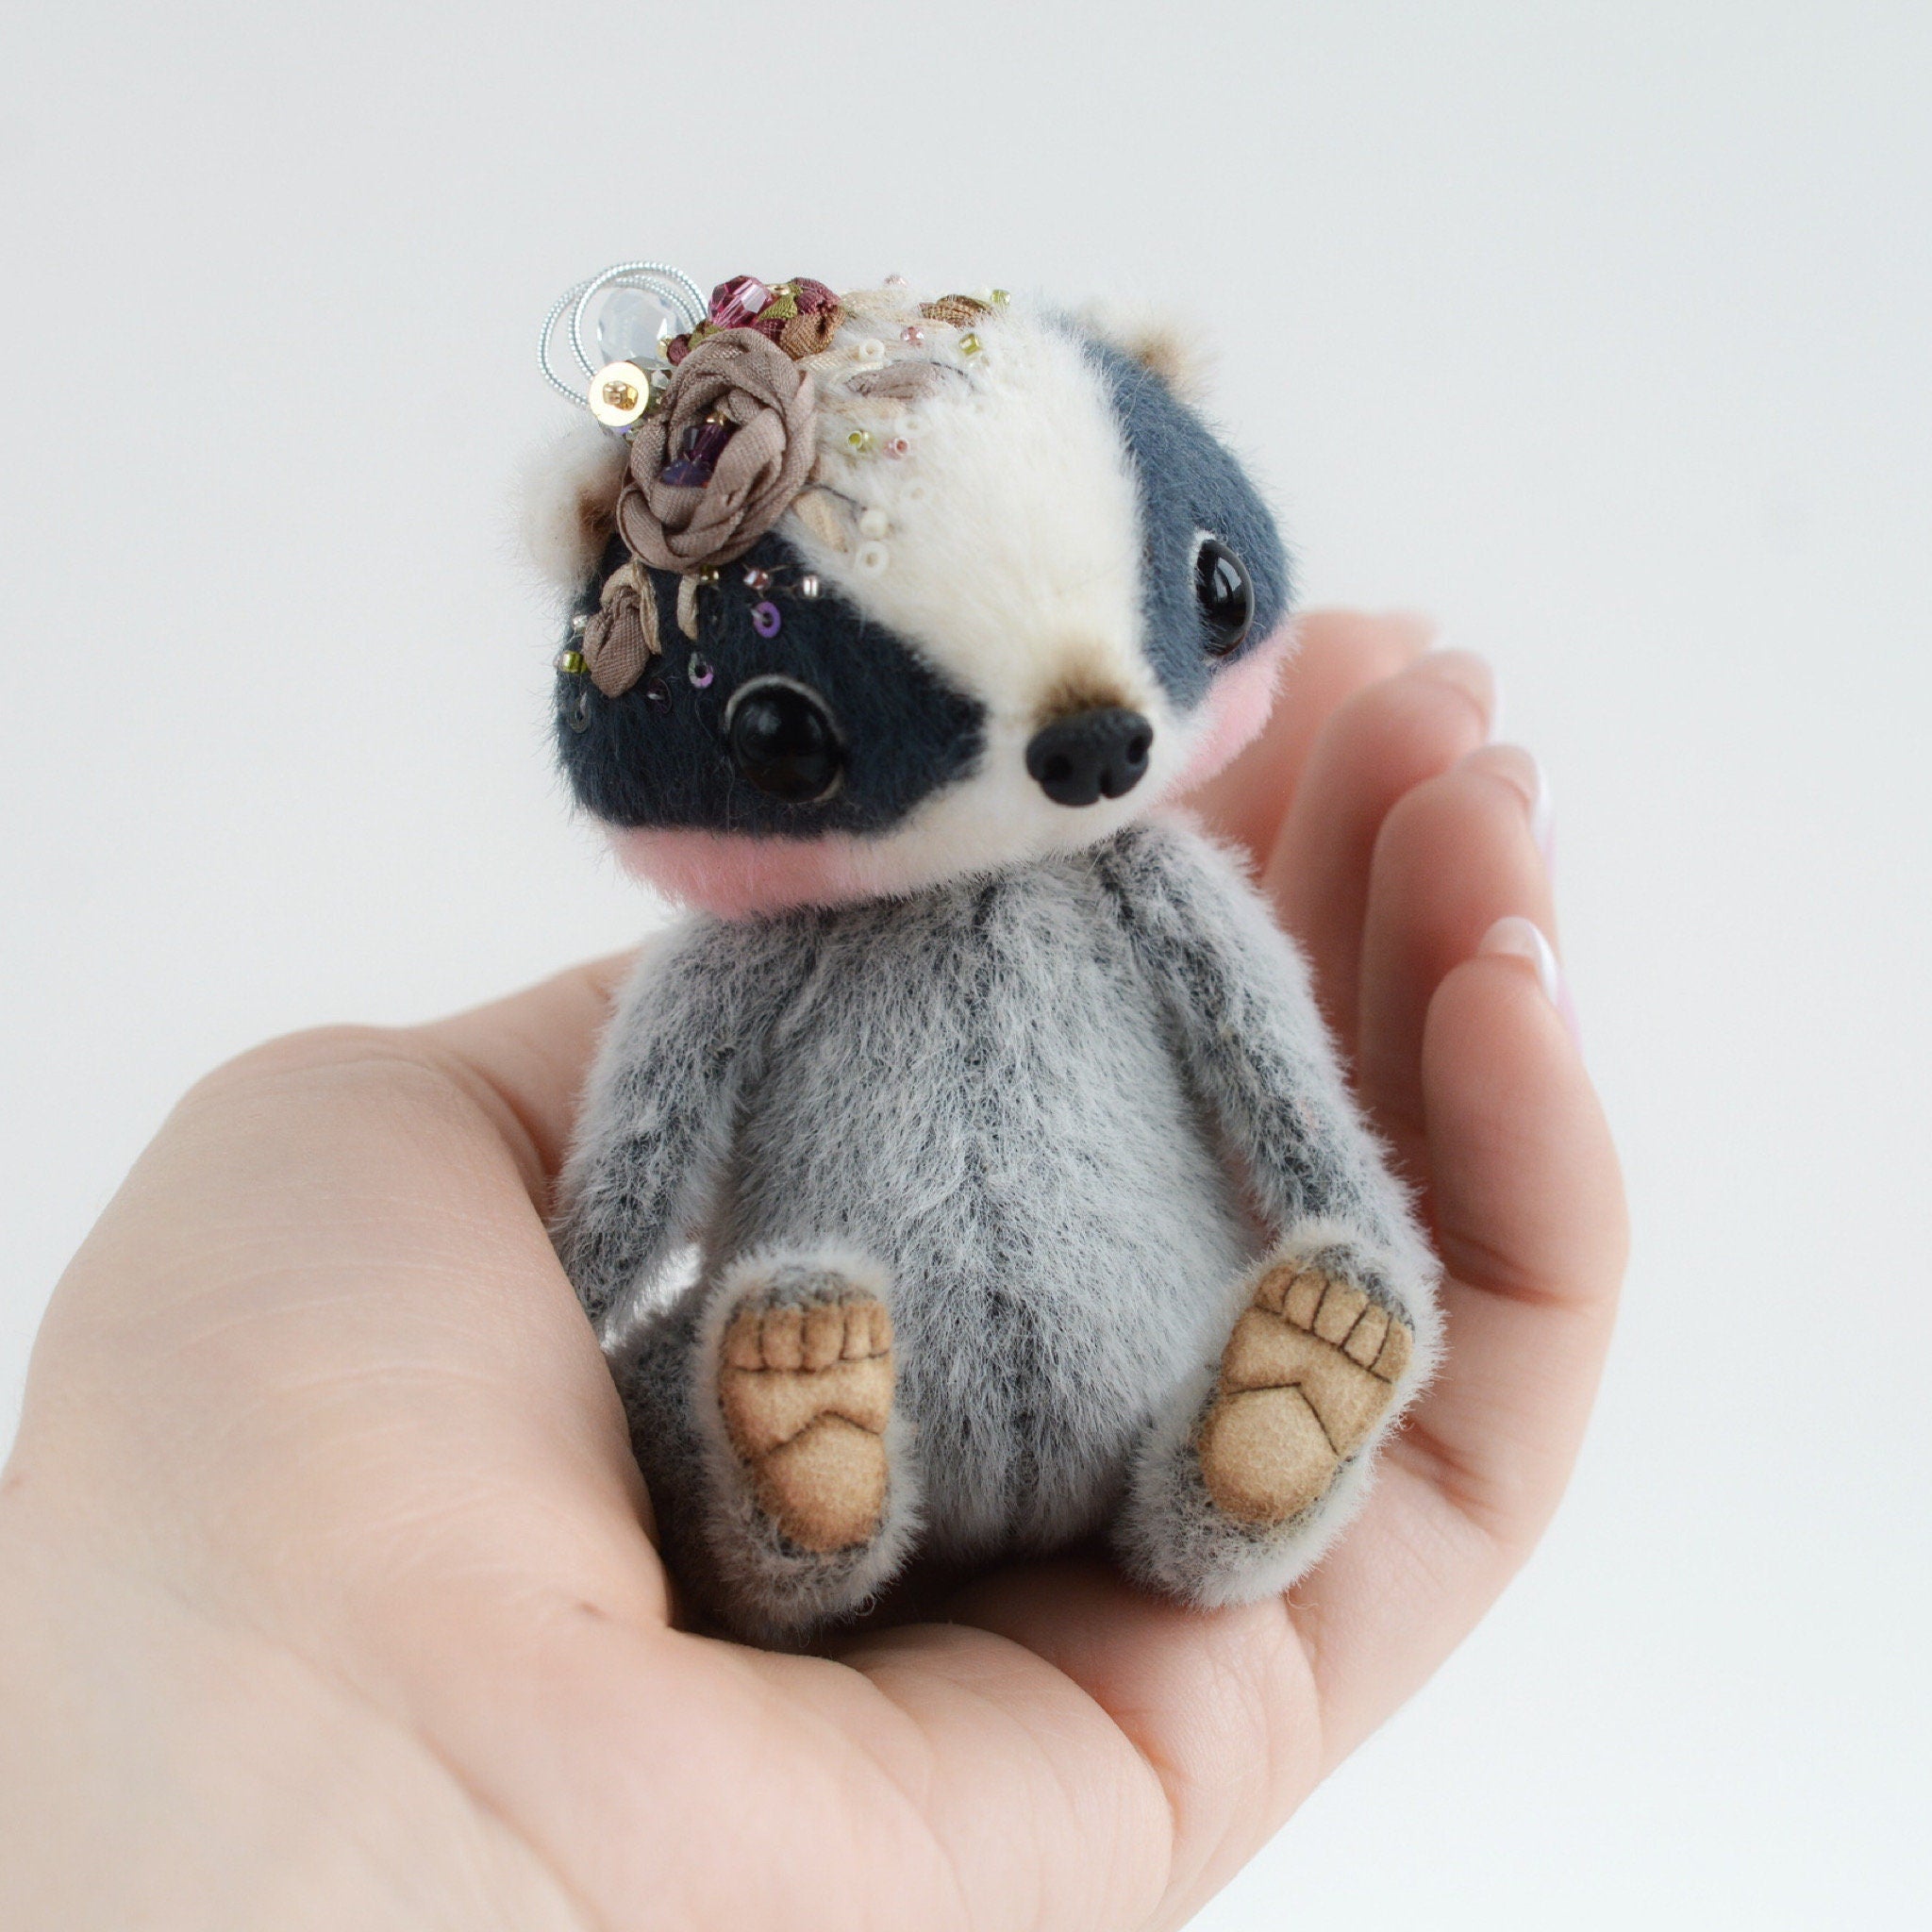 Badger - Sewing Pattern Step-by-step Miniature jointed toy how to make teddy, diy stuffed toy, digital e-pattern PDF, download instructions